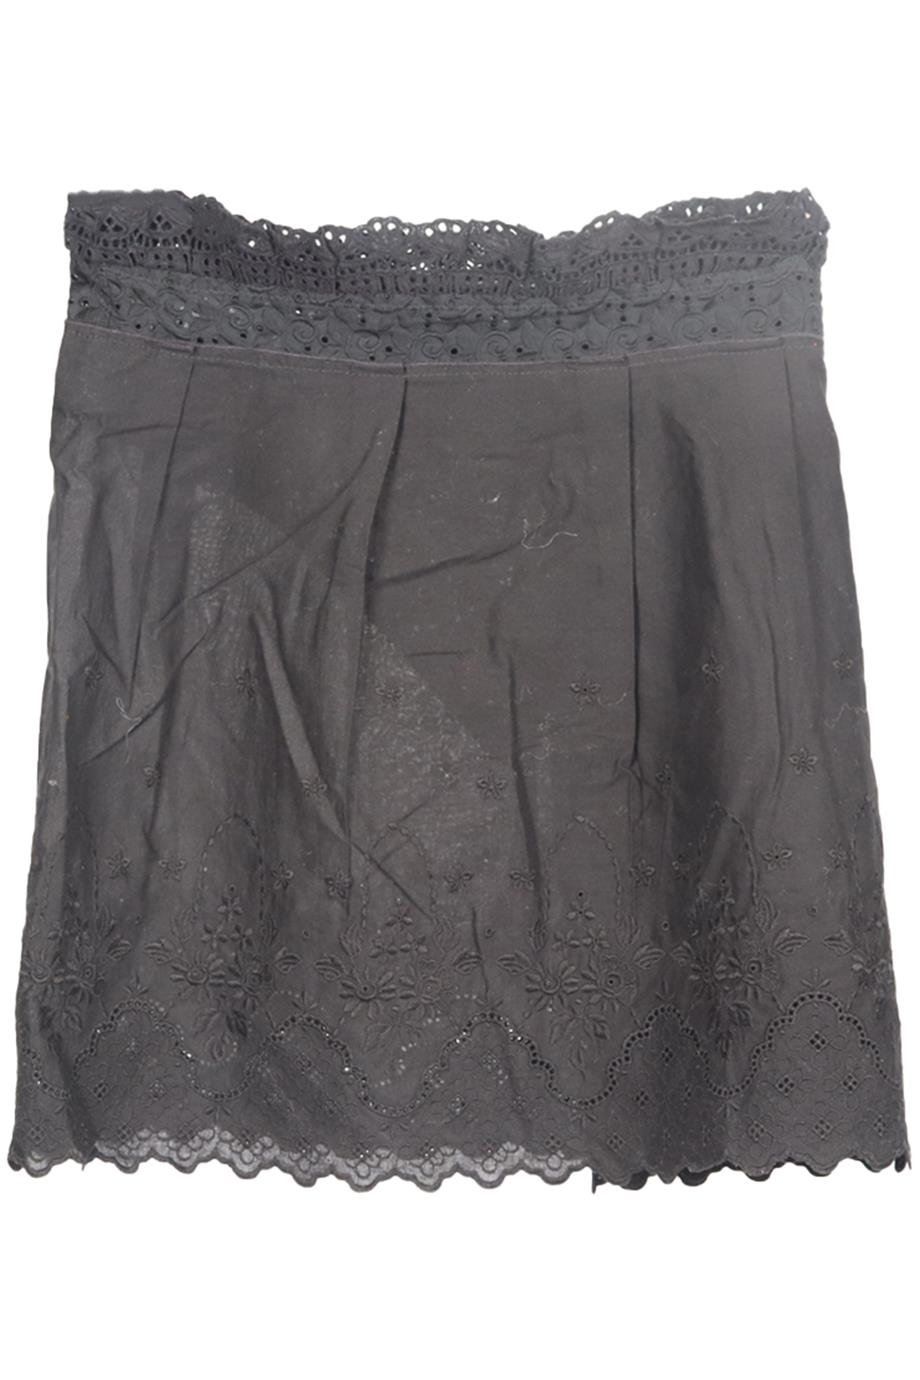 DOLCE AND GABBANA BRODERIE ANGLAISE COTTON MINI SKIRT IT 38 UK 6